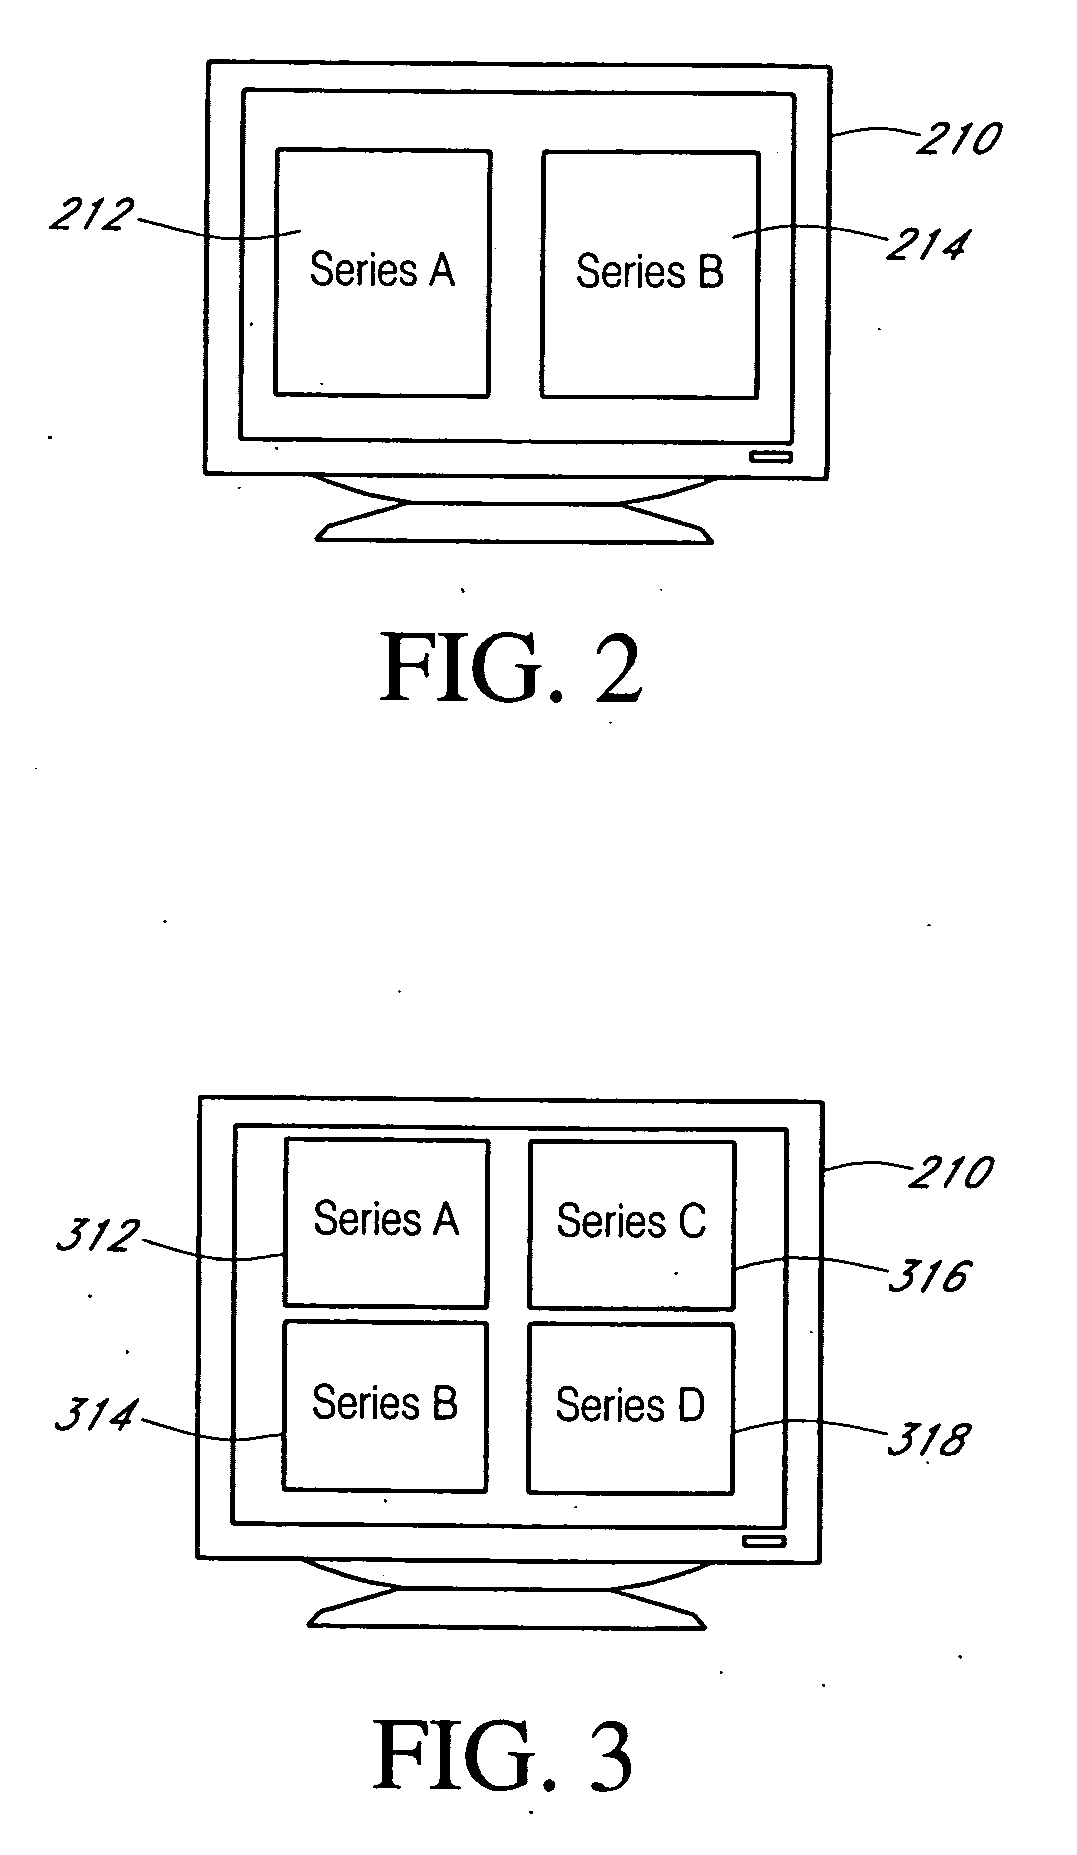 Systems and methods for interleaving series of medical images